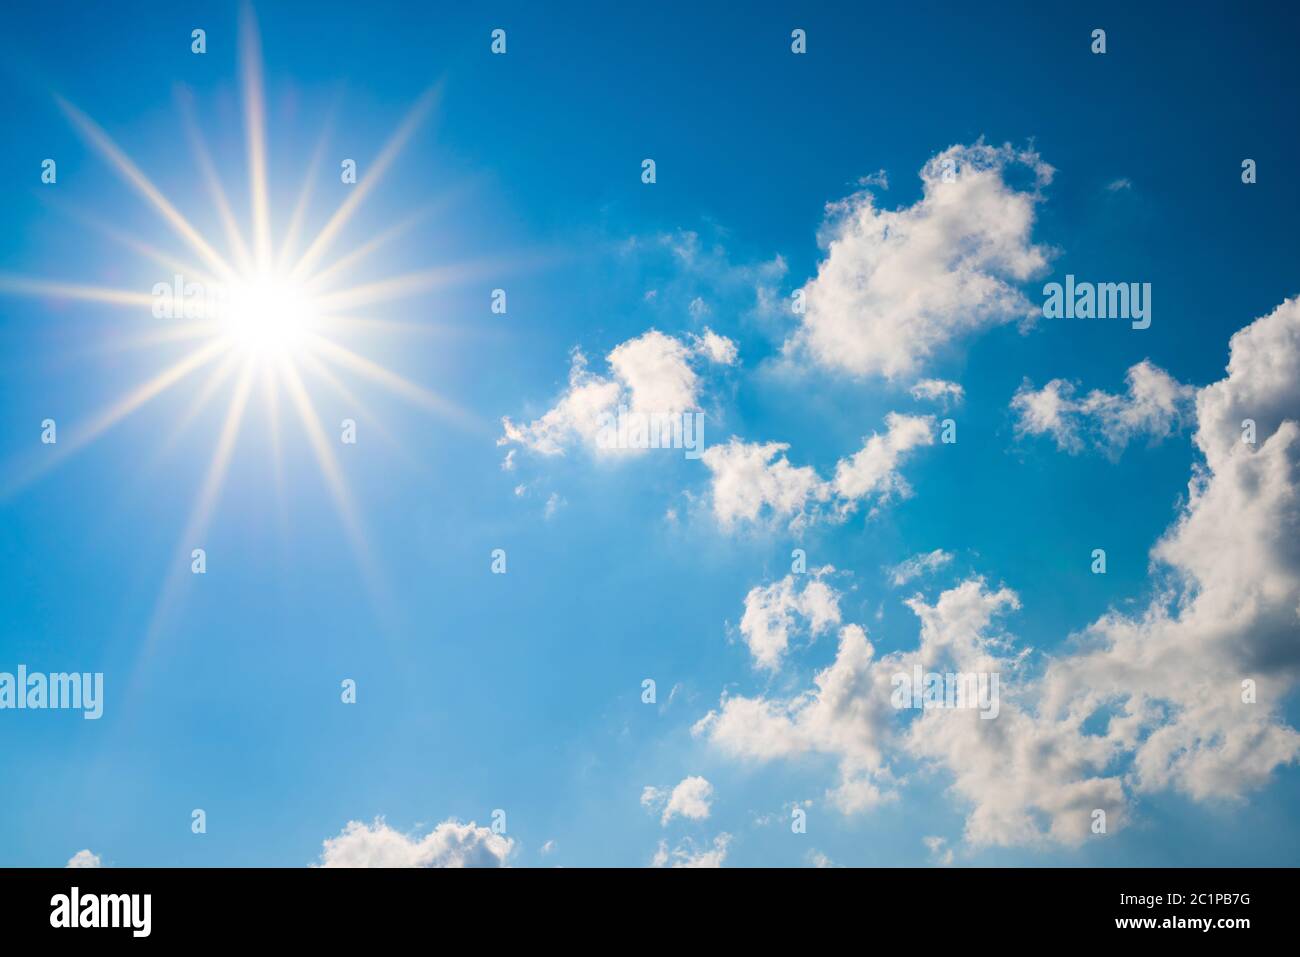 Hot summer or heat wave background, wonderful blue sky with glowing sun and clouds Stock Photo